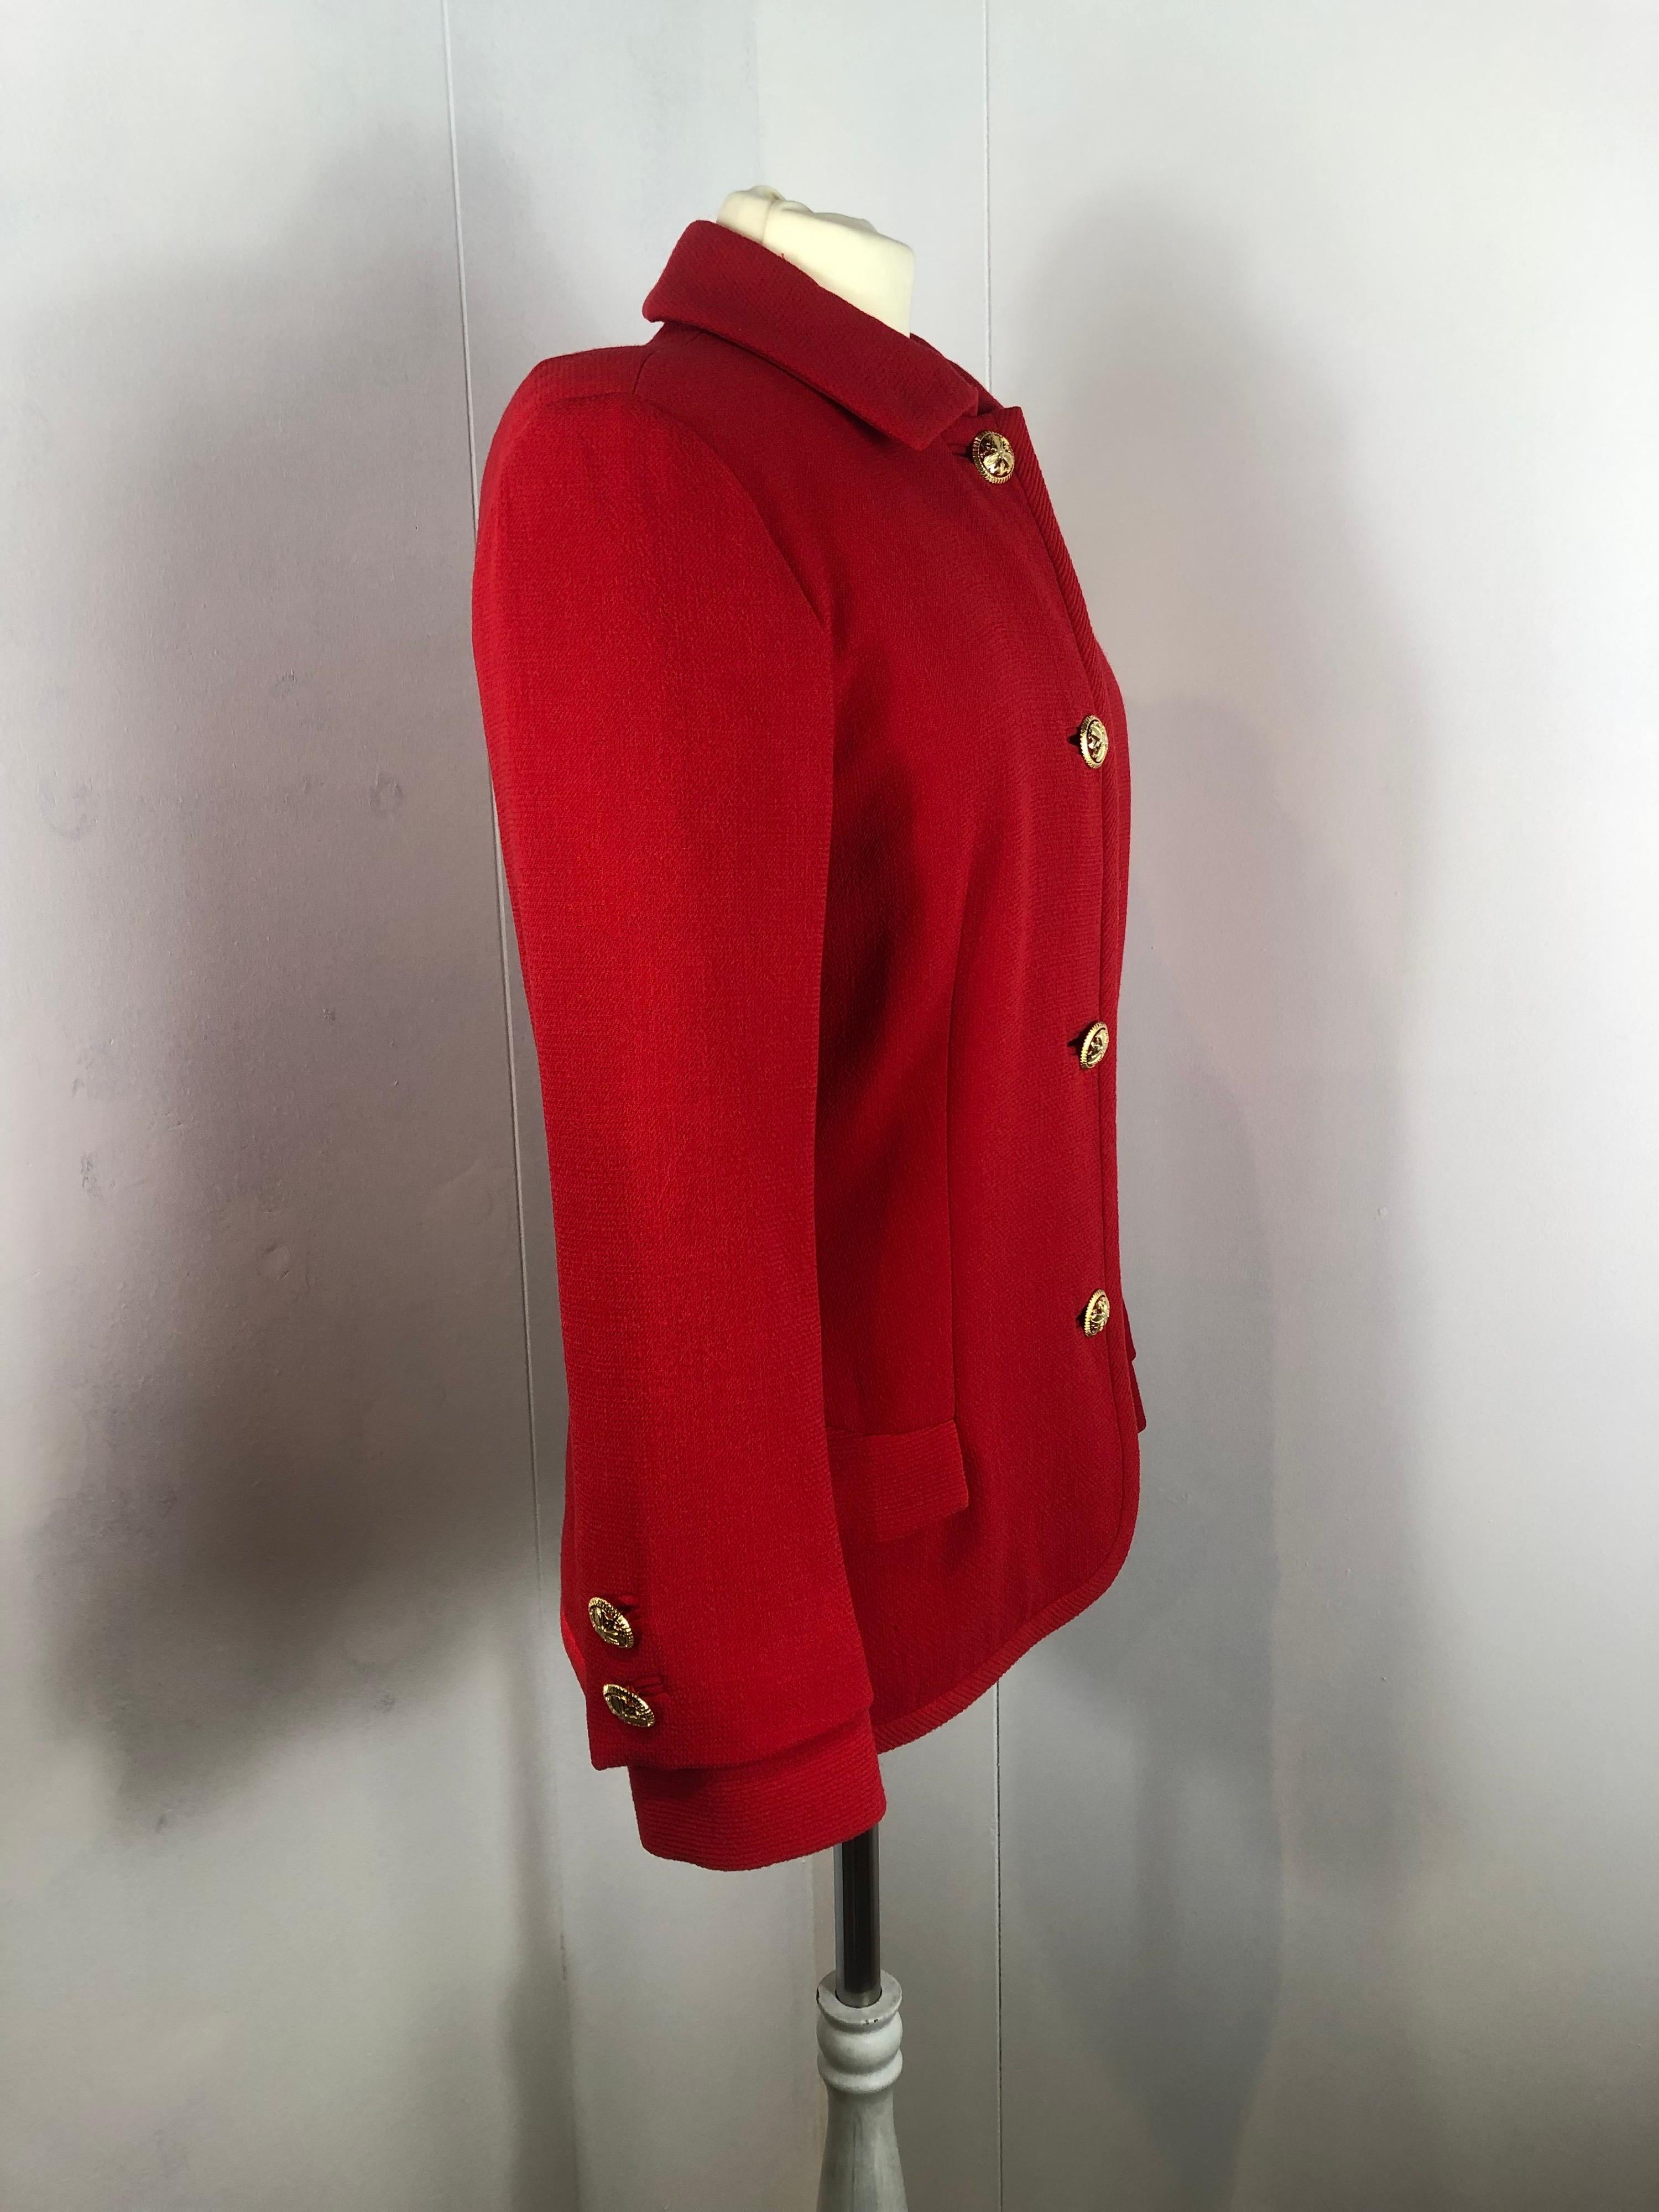 Gianni Versace vintage red jacket . About 80s.
Fabric is a mix between wool and virgin wool. Fully lined.
Featuring 2 front pockets still closed, jewellery bottoms and padded shoulder.
One of the bottoms is missing as you can see in the photos.
Size